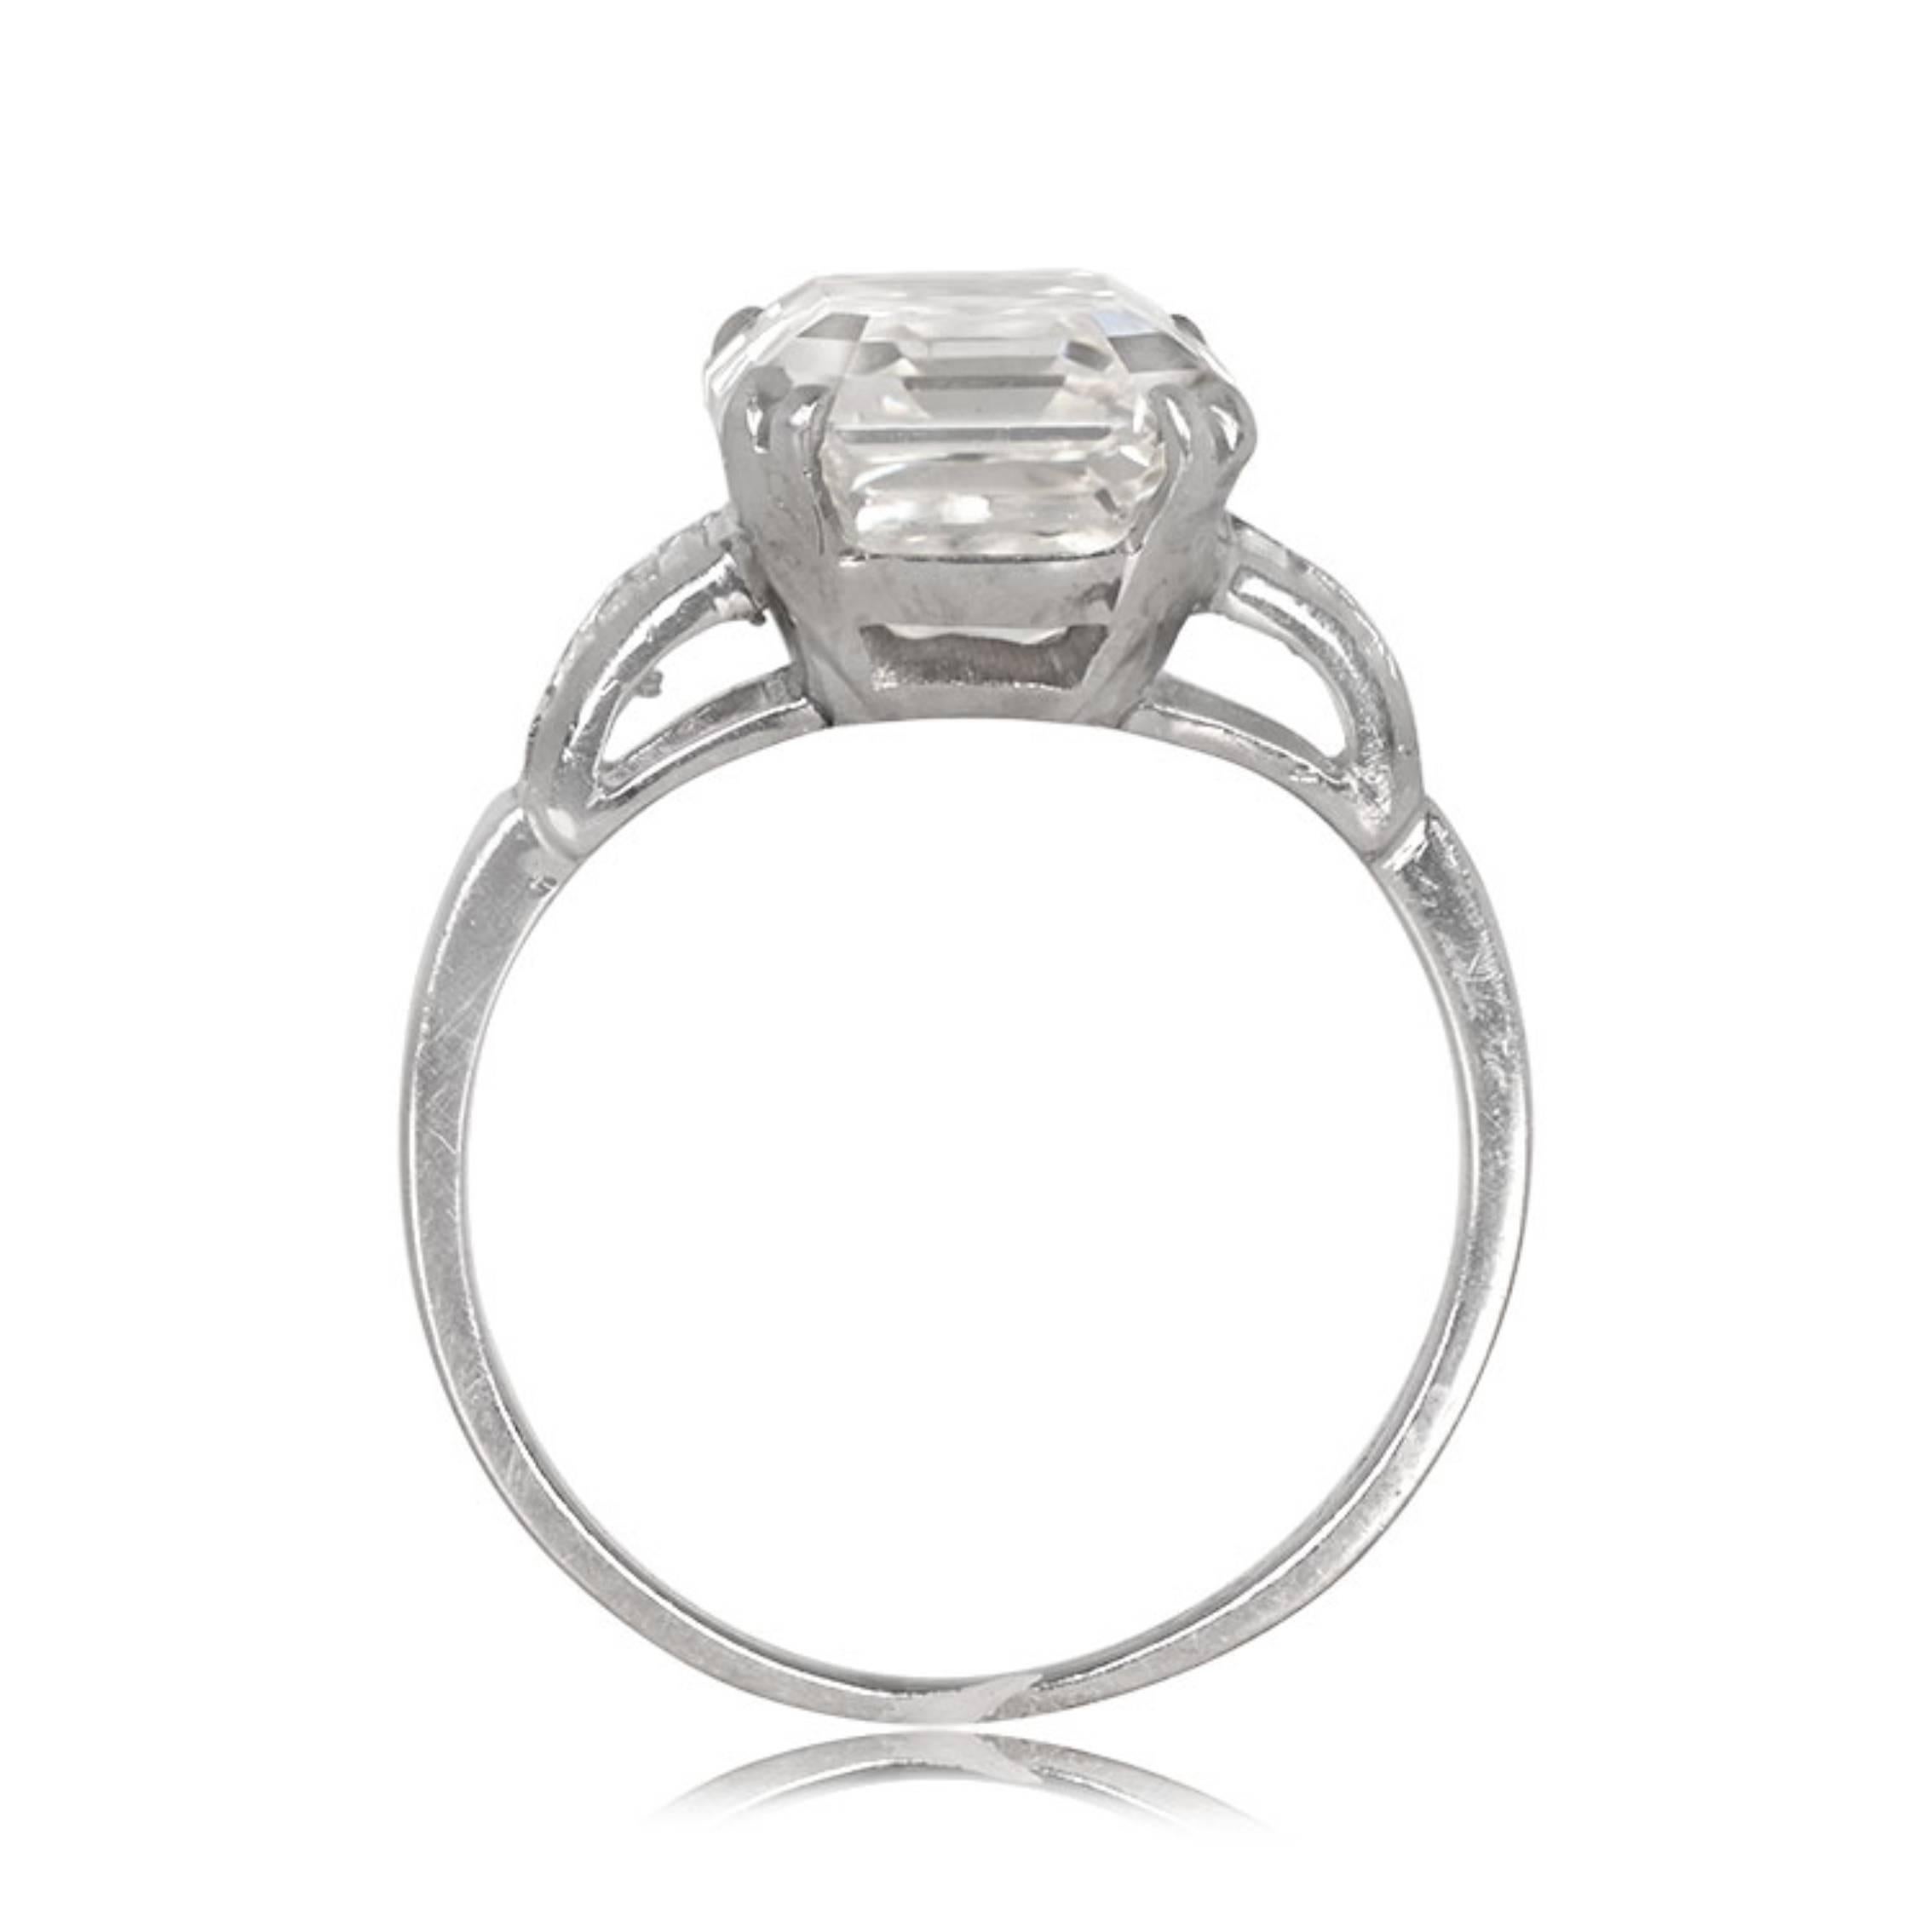 GIA 5.05ct Emerald Cut Diamond Engagement Ring, I Color, VS1 Clarity, Platinum In Excellent Condition For Sale In New York, NY